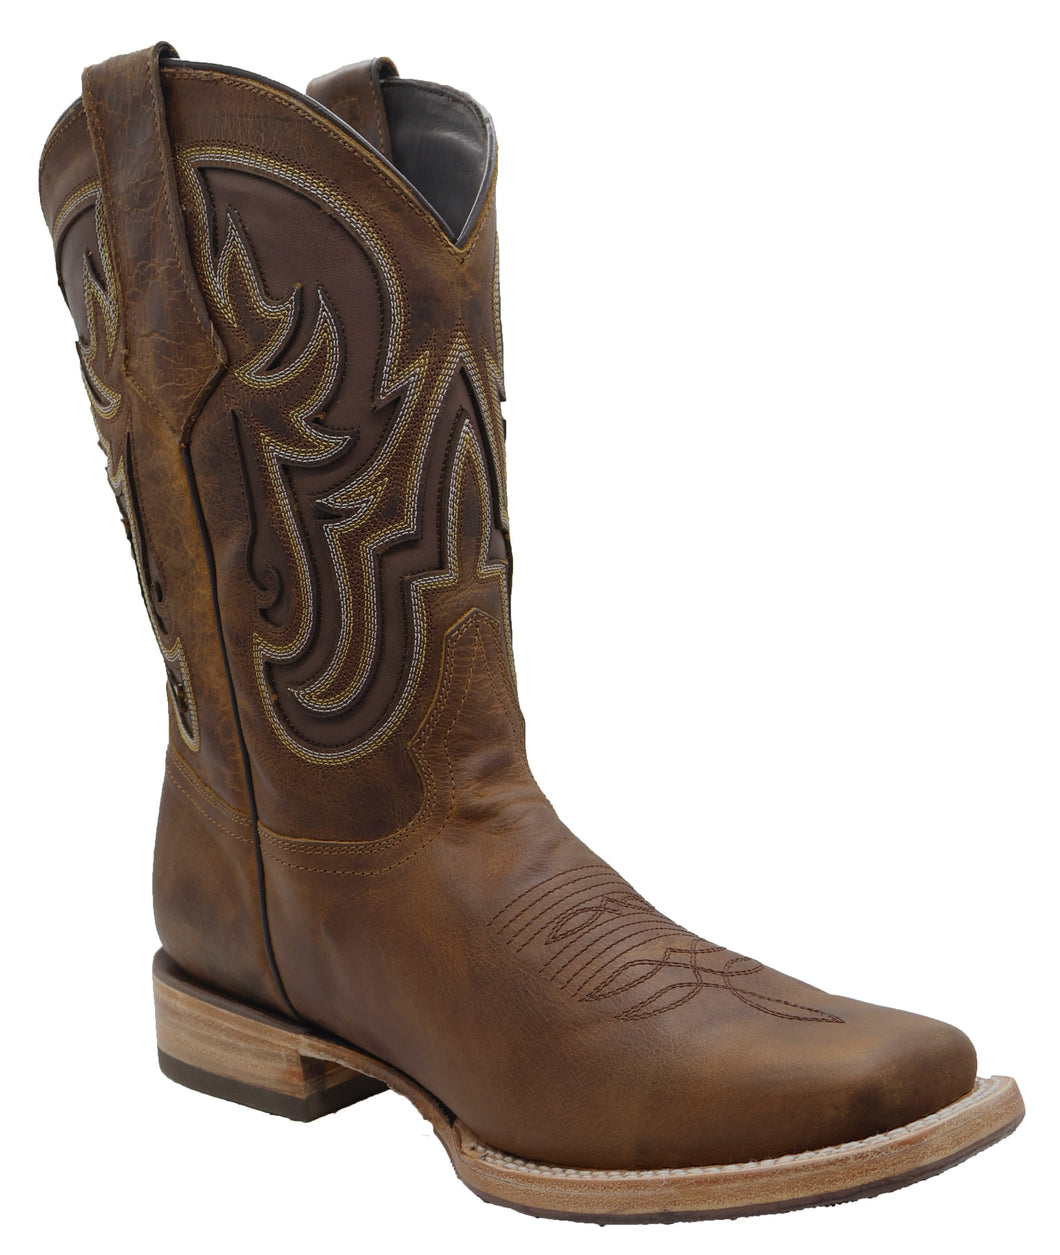 Silverton Ranch All Leather Square-Toe Boots (Brown)